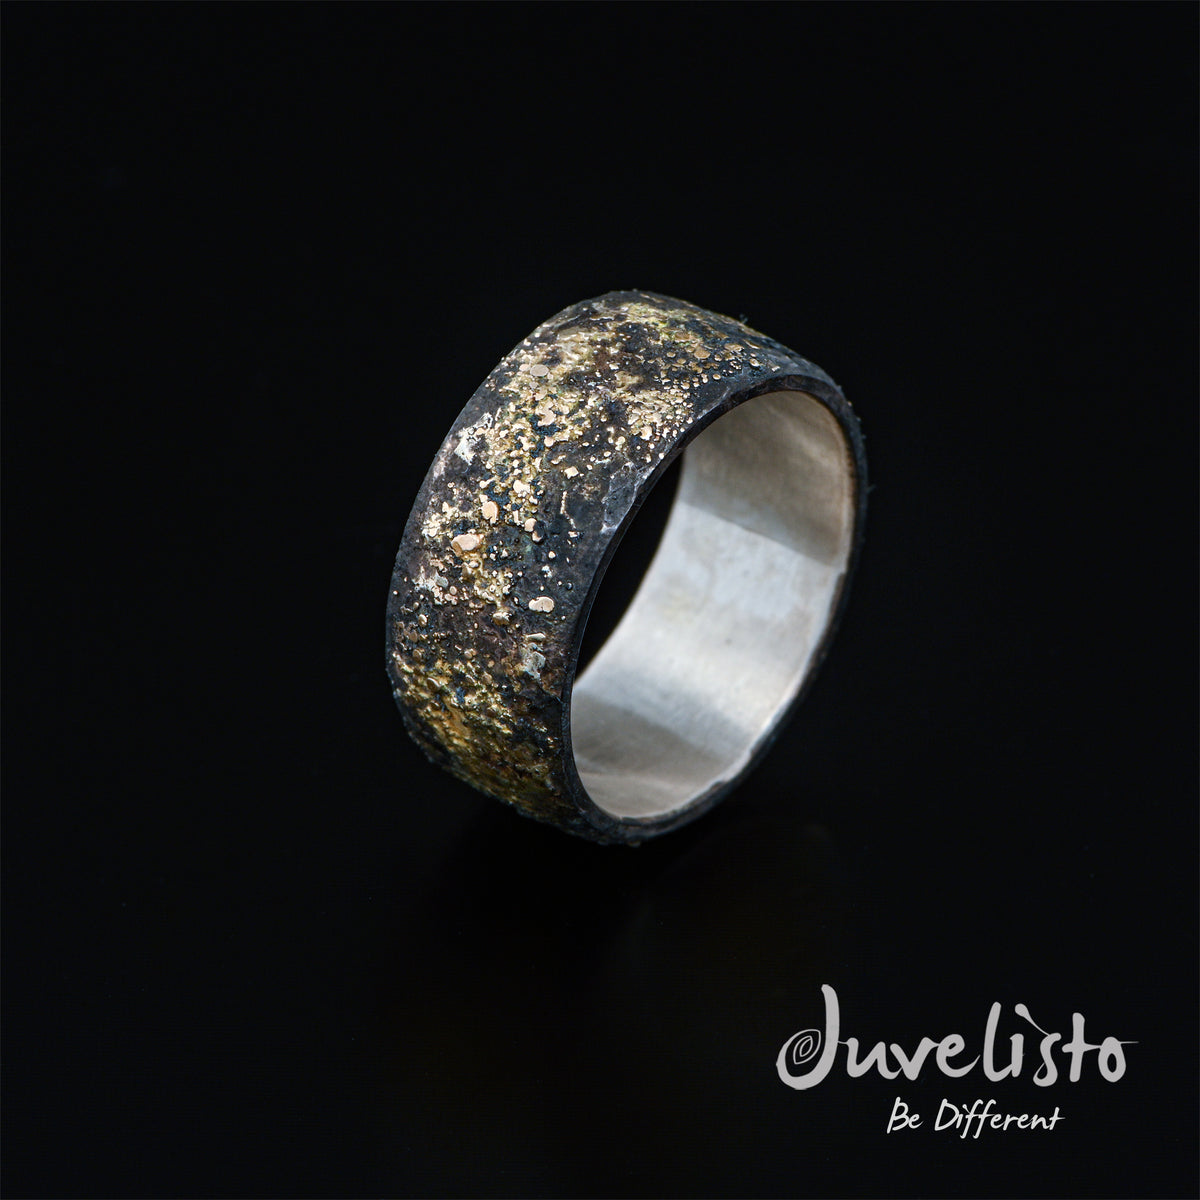 Juvelisto Design| Golden Galaxy Collection Sterling Silver and Fused Gold Ring 9.5mm